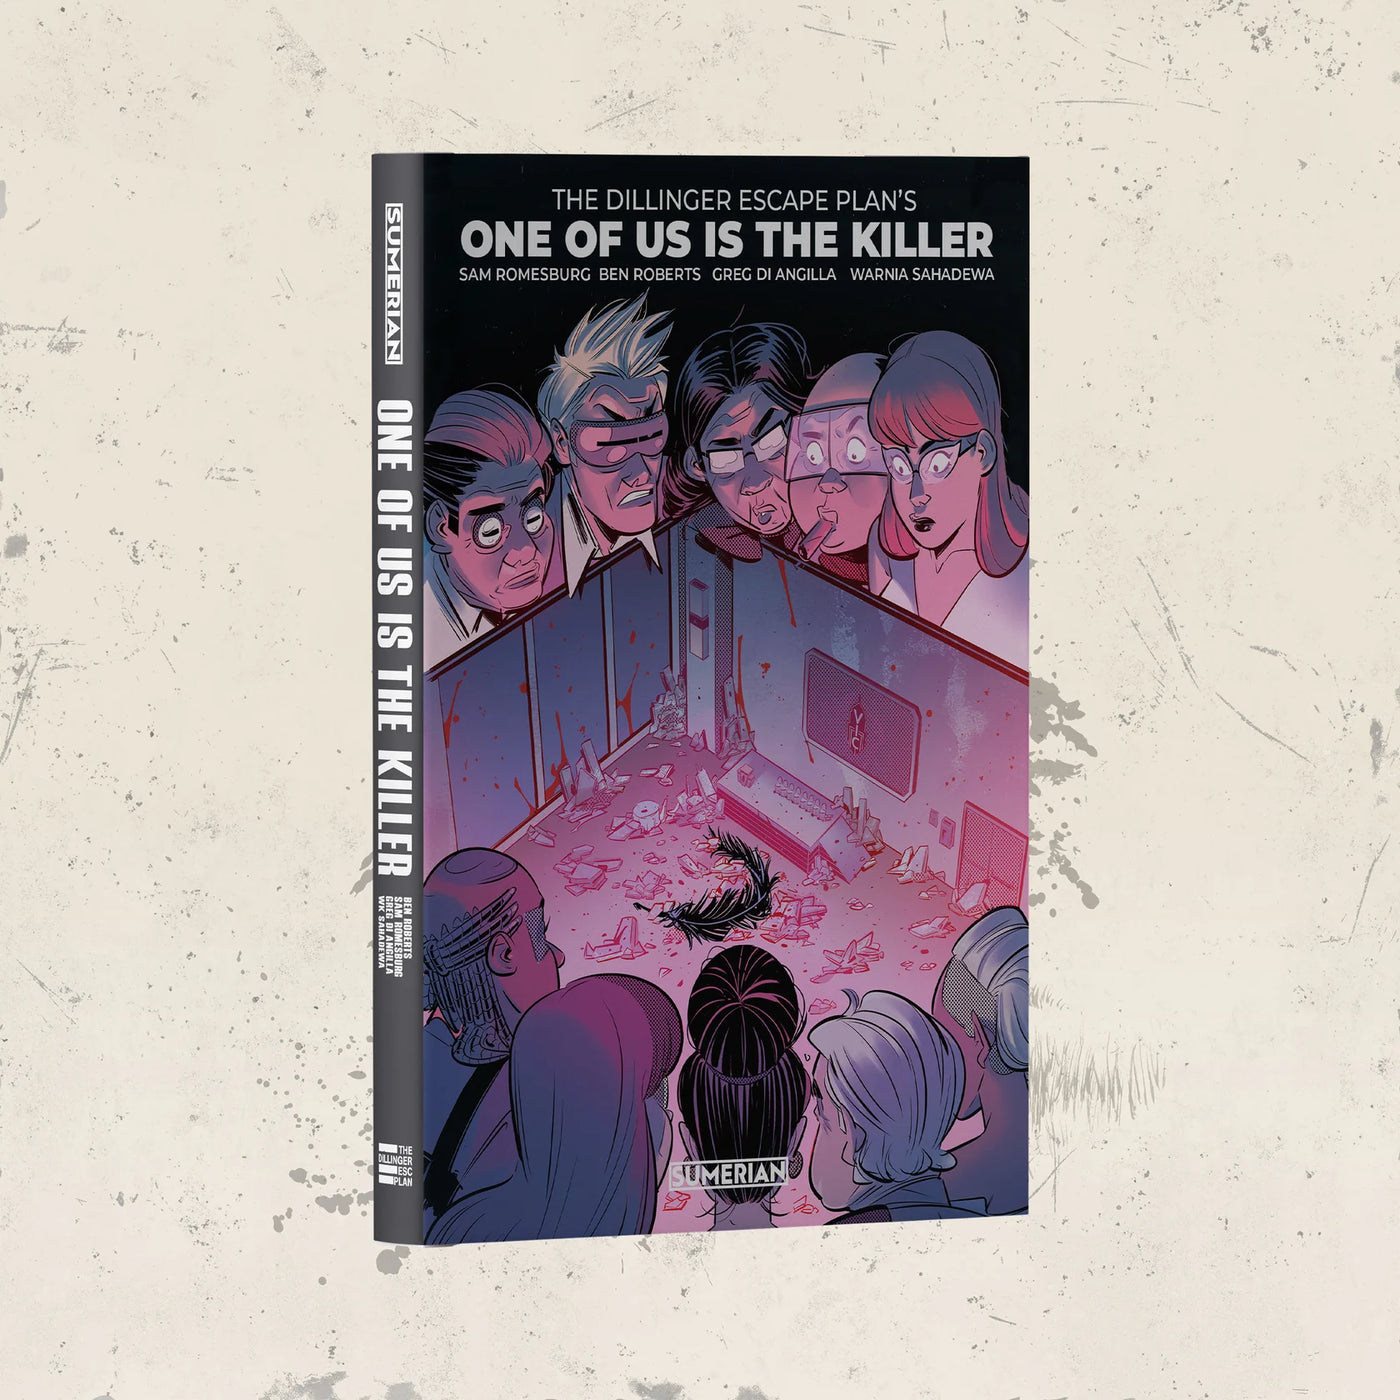 The Dillinger Escape Plan - 'One Of Us Is The Killer' Comic